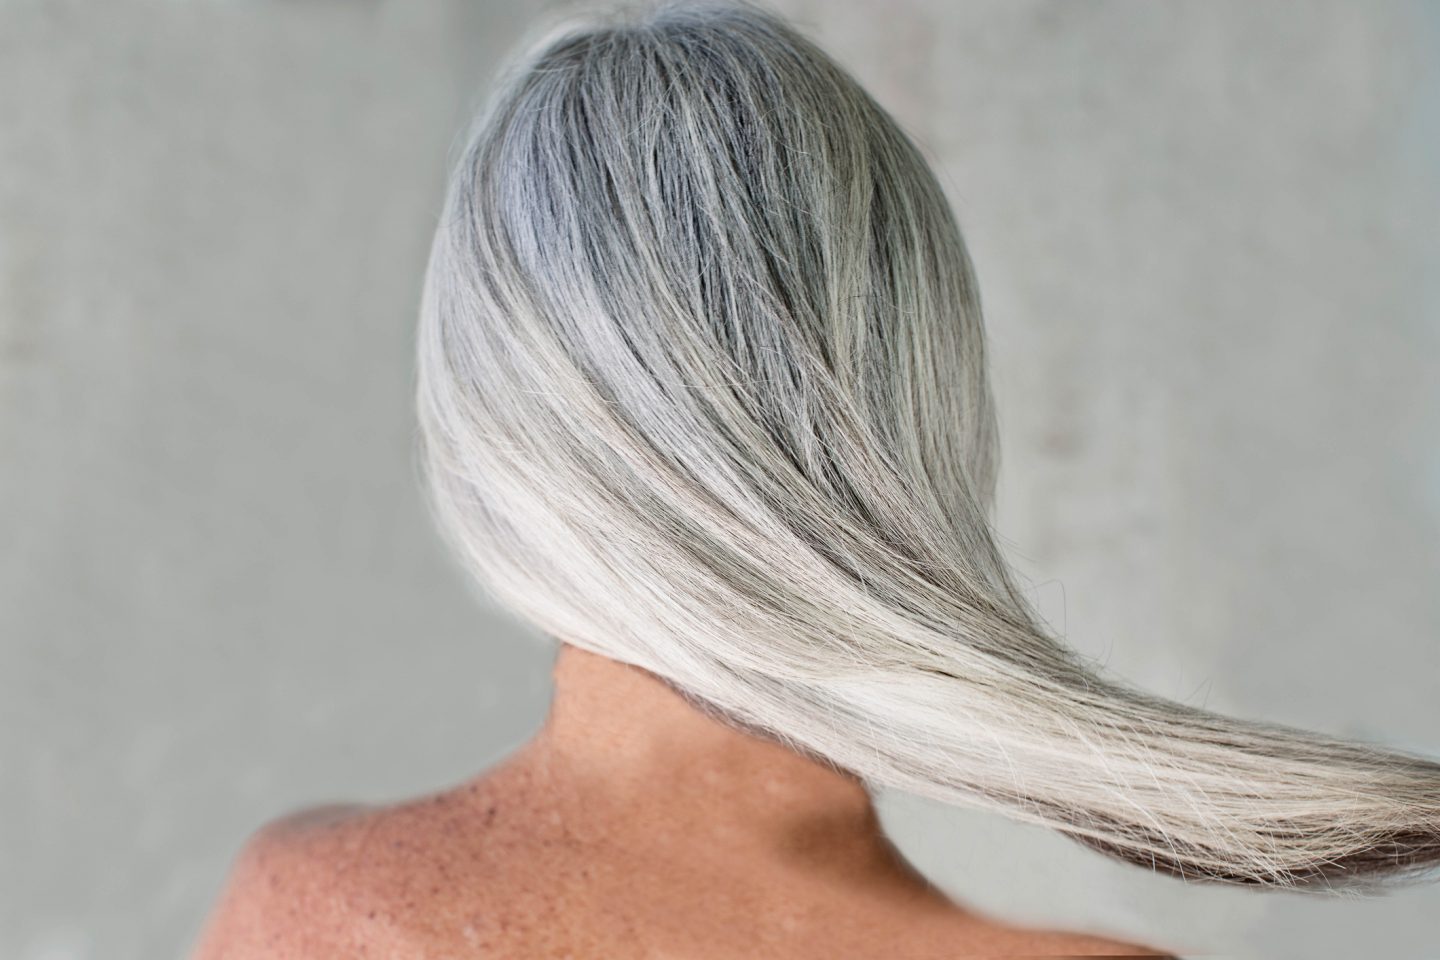 Inflammation can turn your hair grey